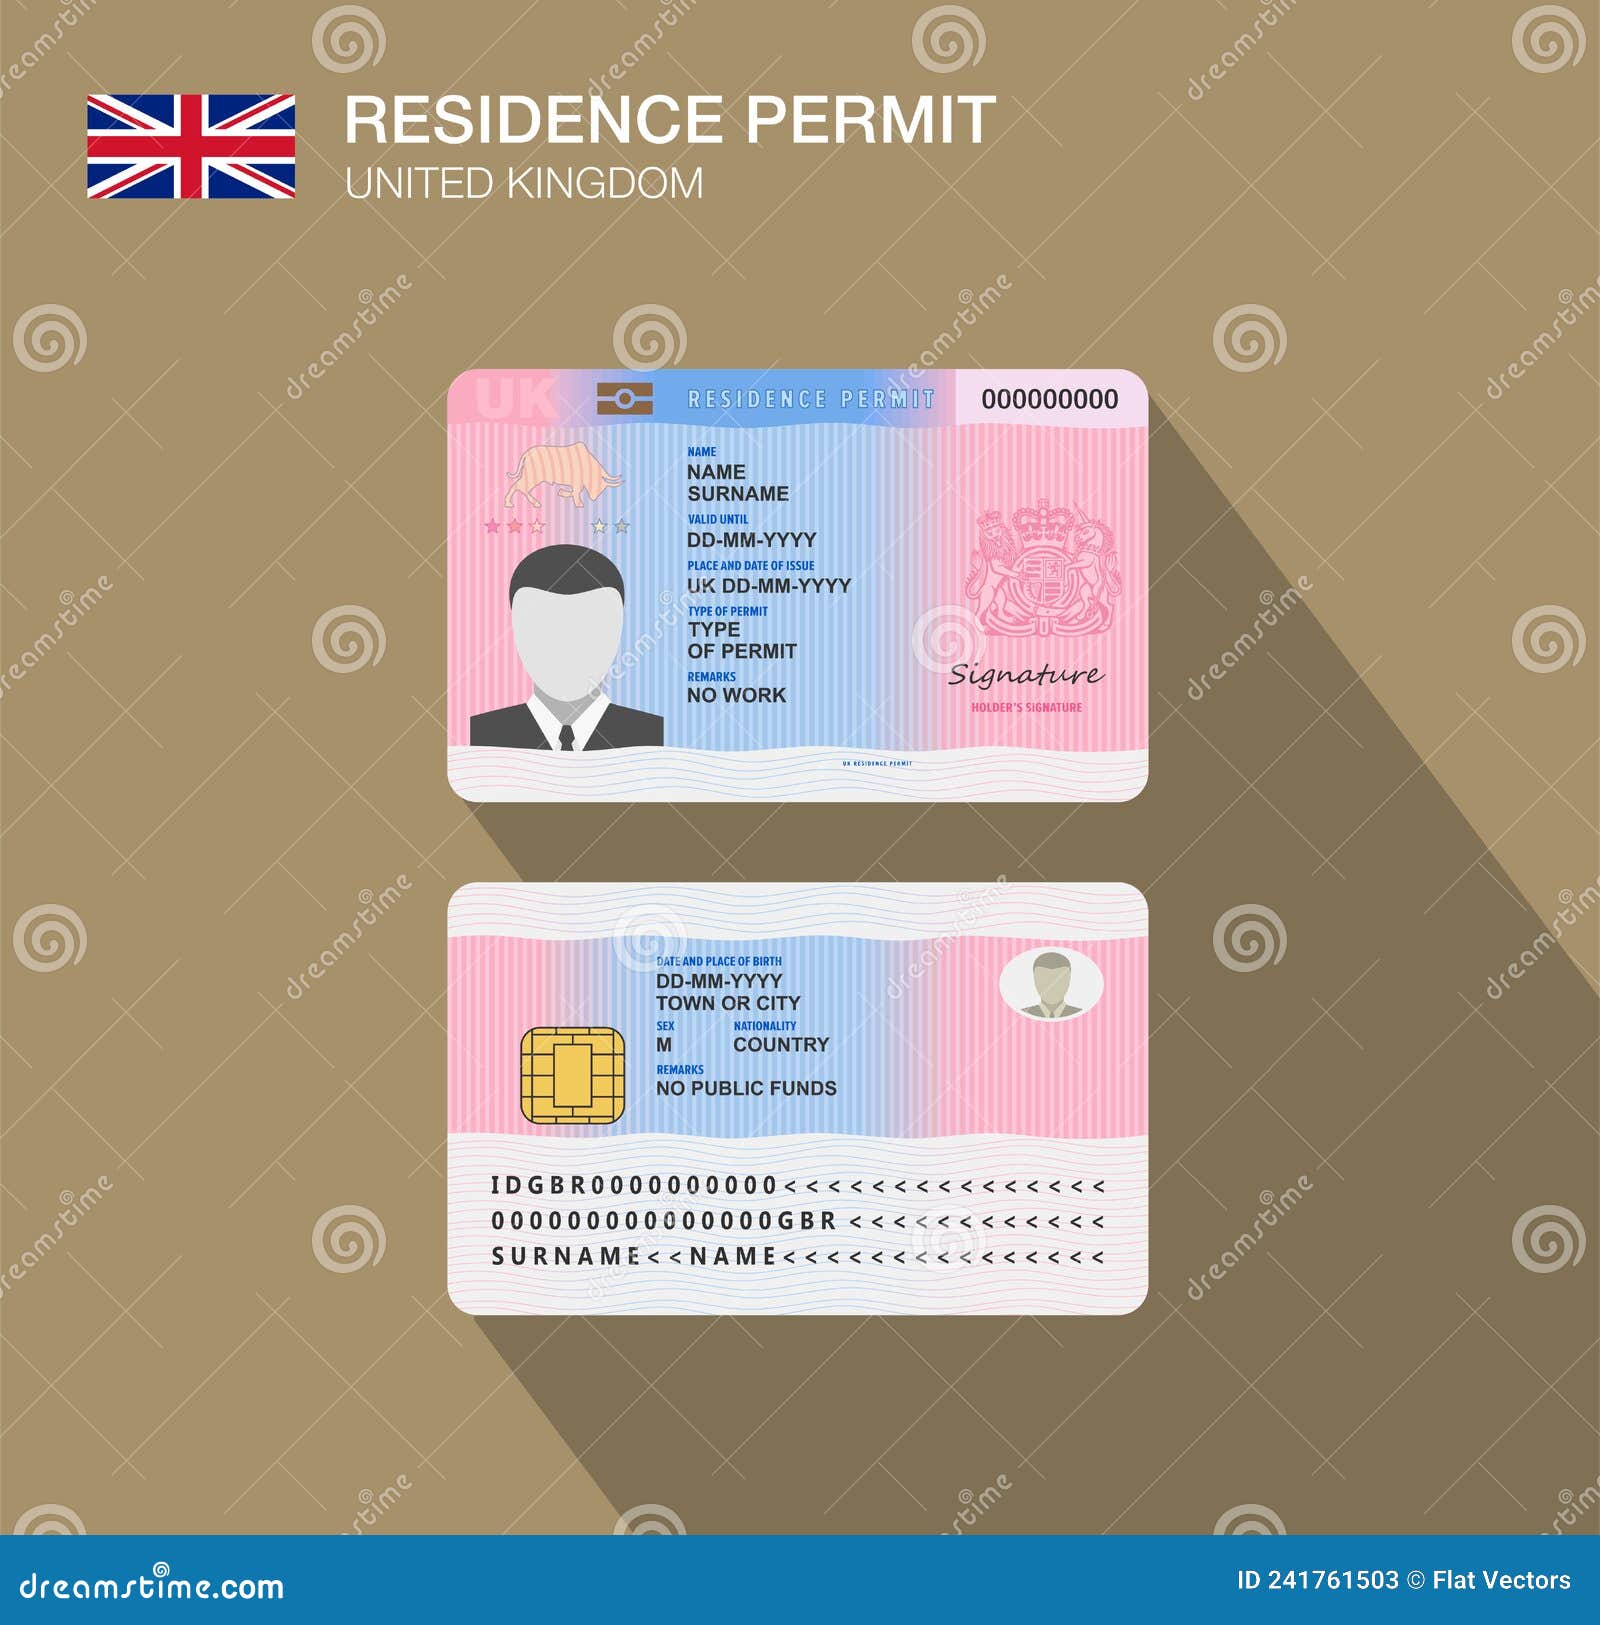 united kingdom national permit residence card. flat   template.